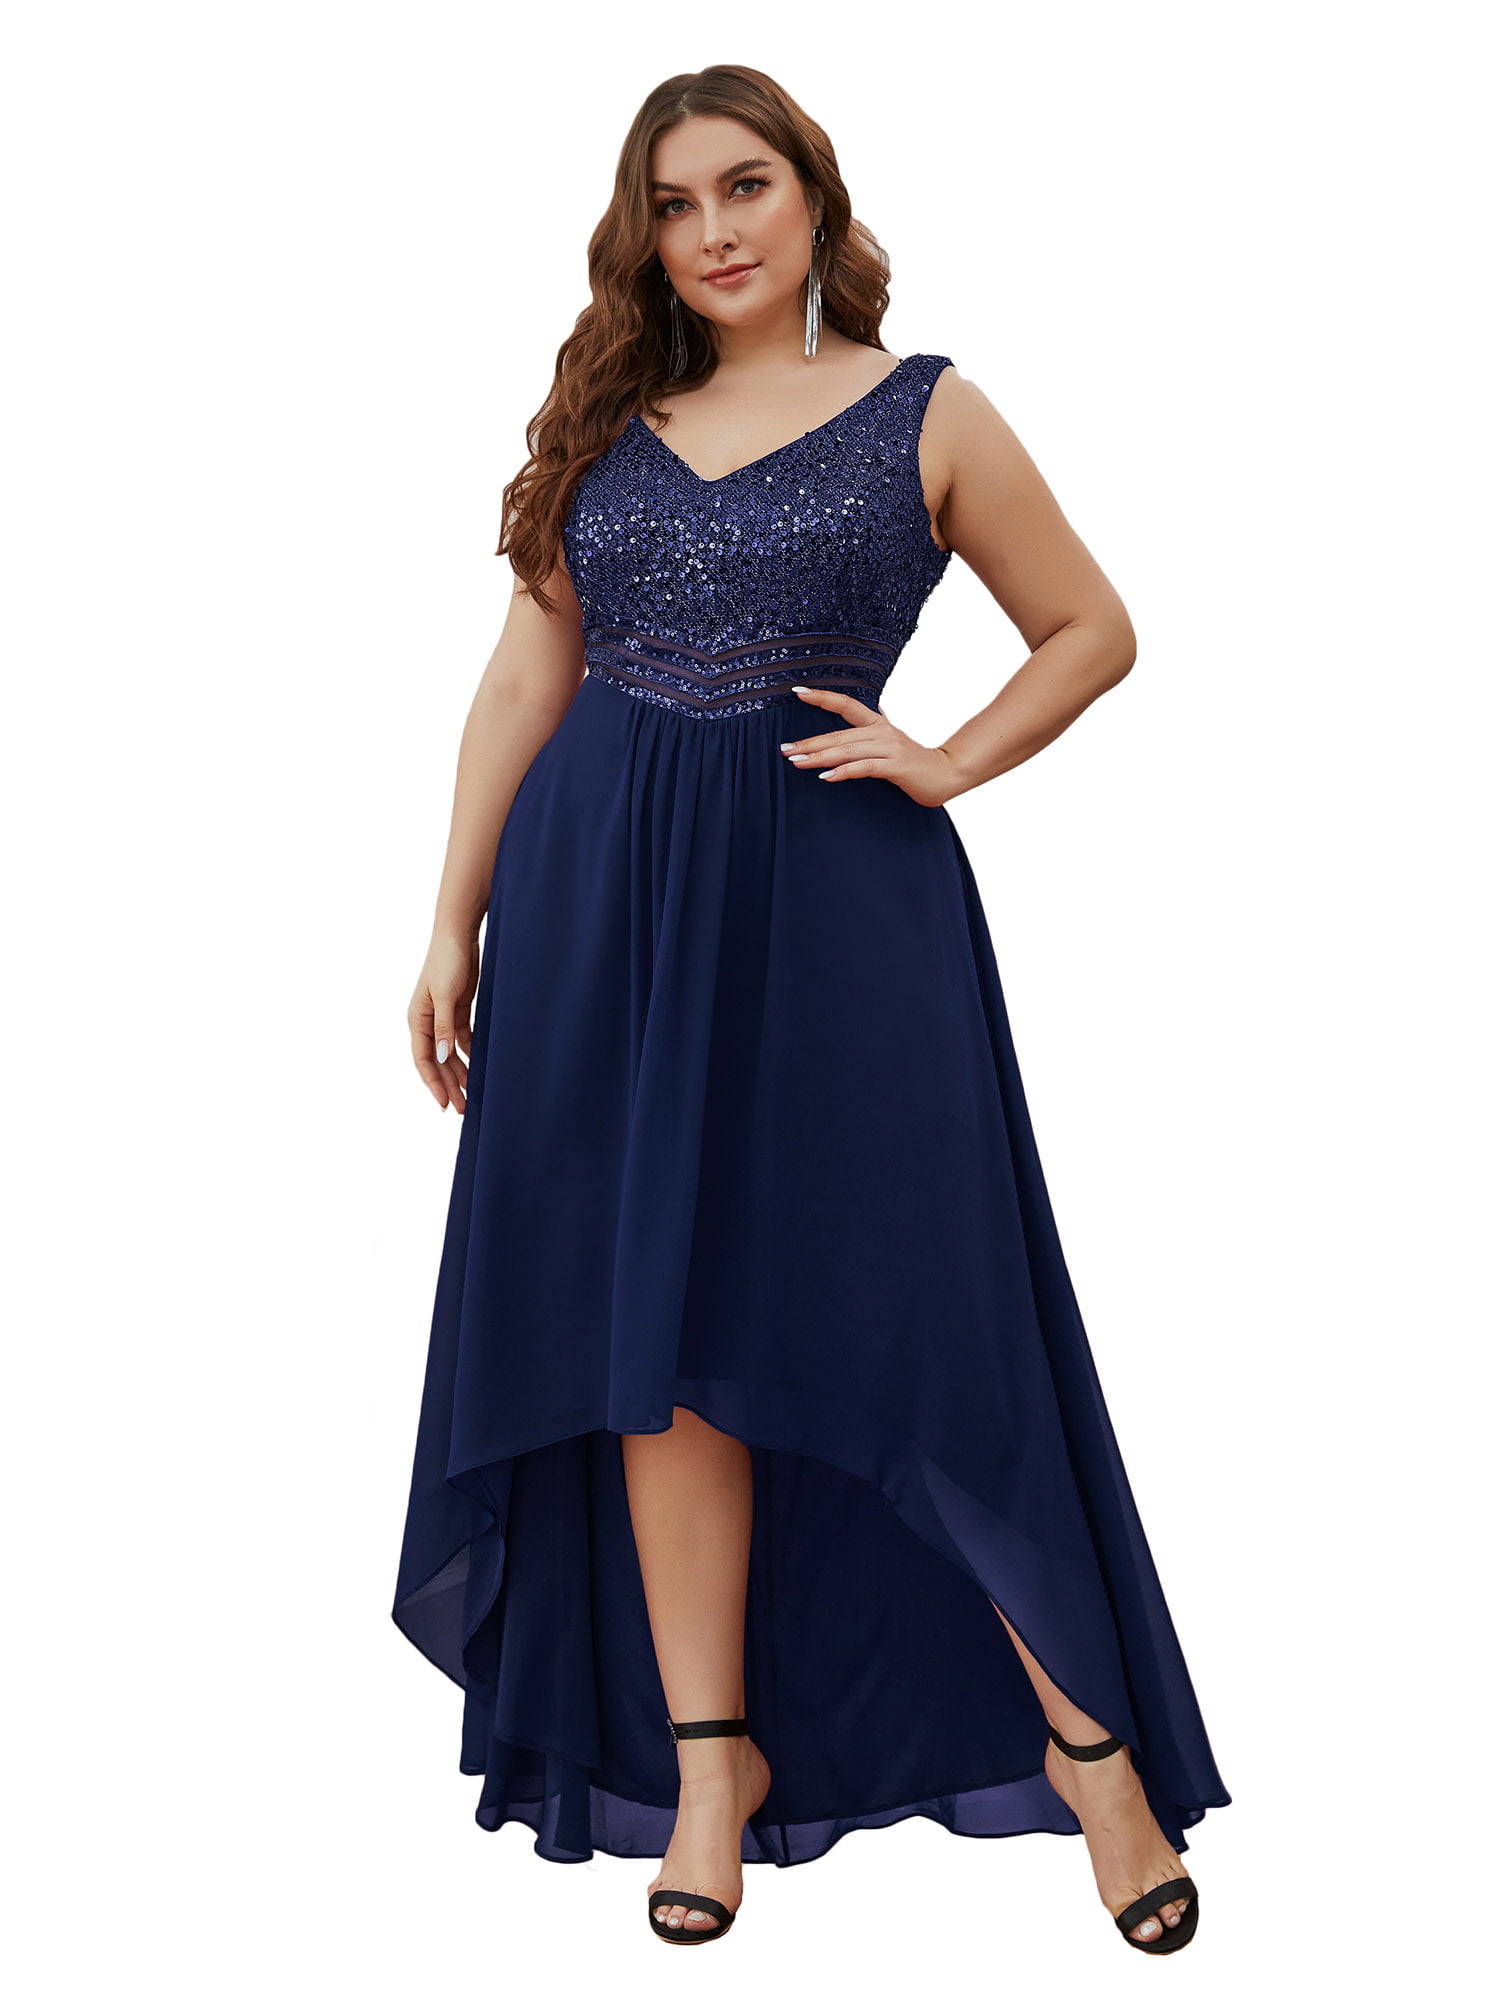 US_Womens Long Chiffon Evening Formal Party Cocktail Bridesmaid Prom Gown Dress 